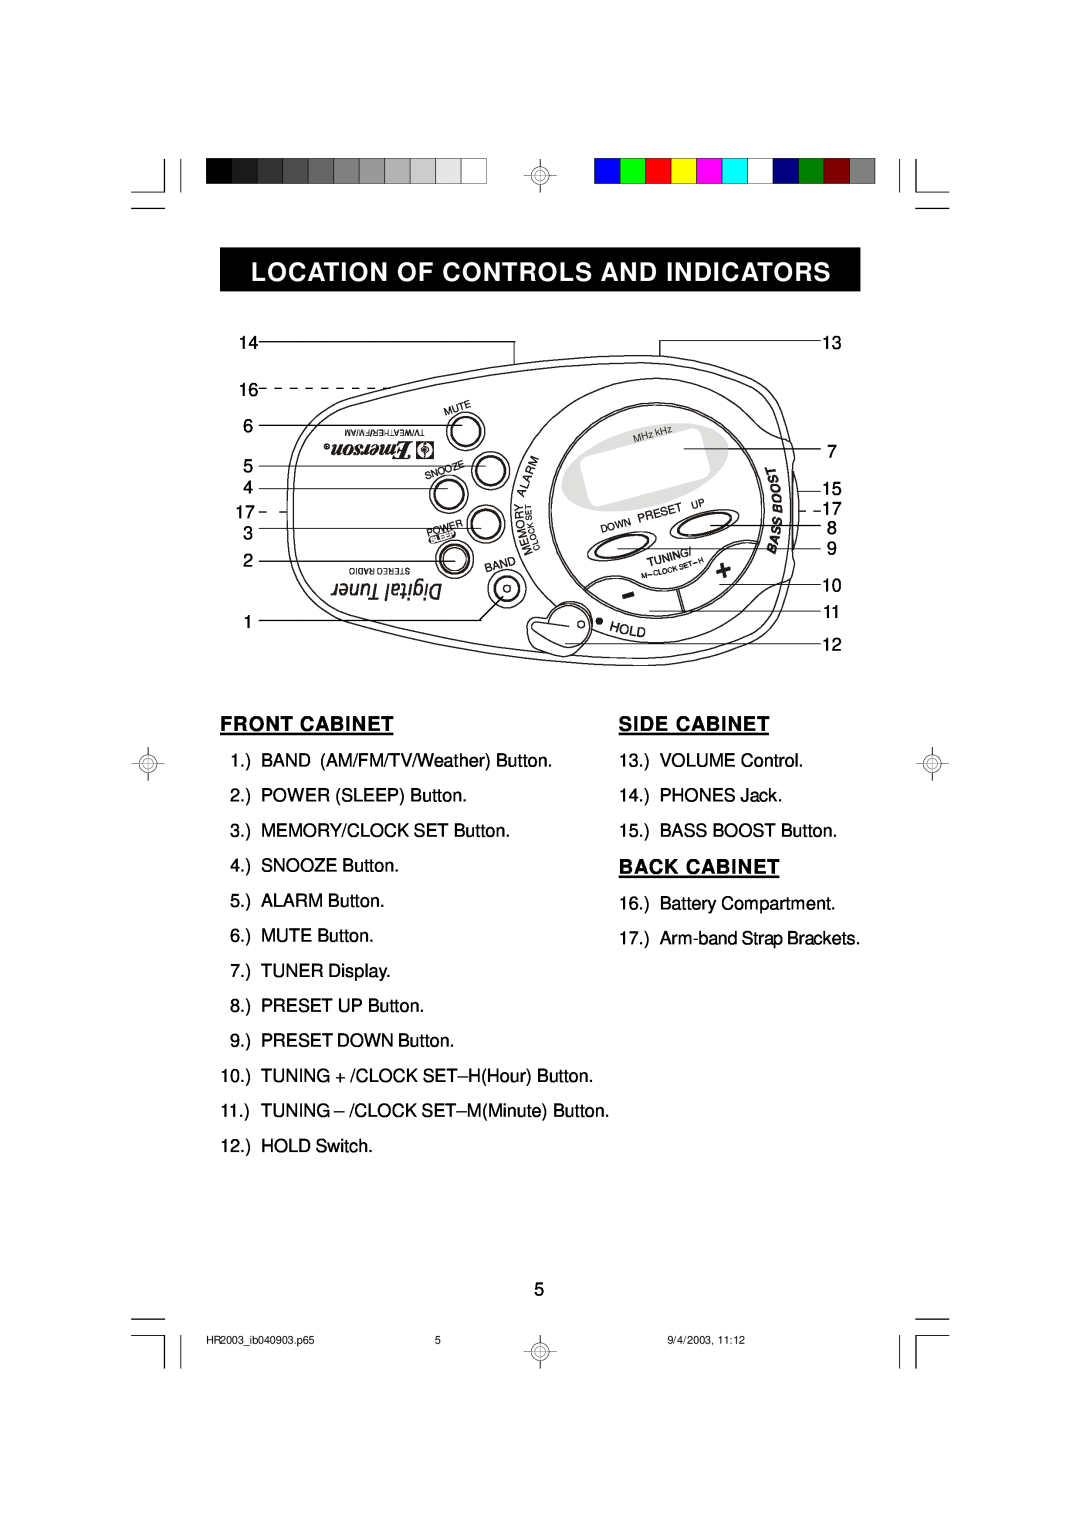 Emerson HR2003 owner manual Location Of Controls And Indicators, Front Cabinet, Side Cabinet, Back Cabinet 